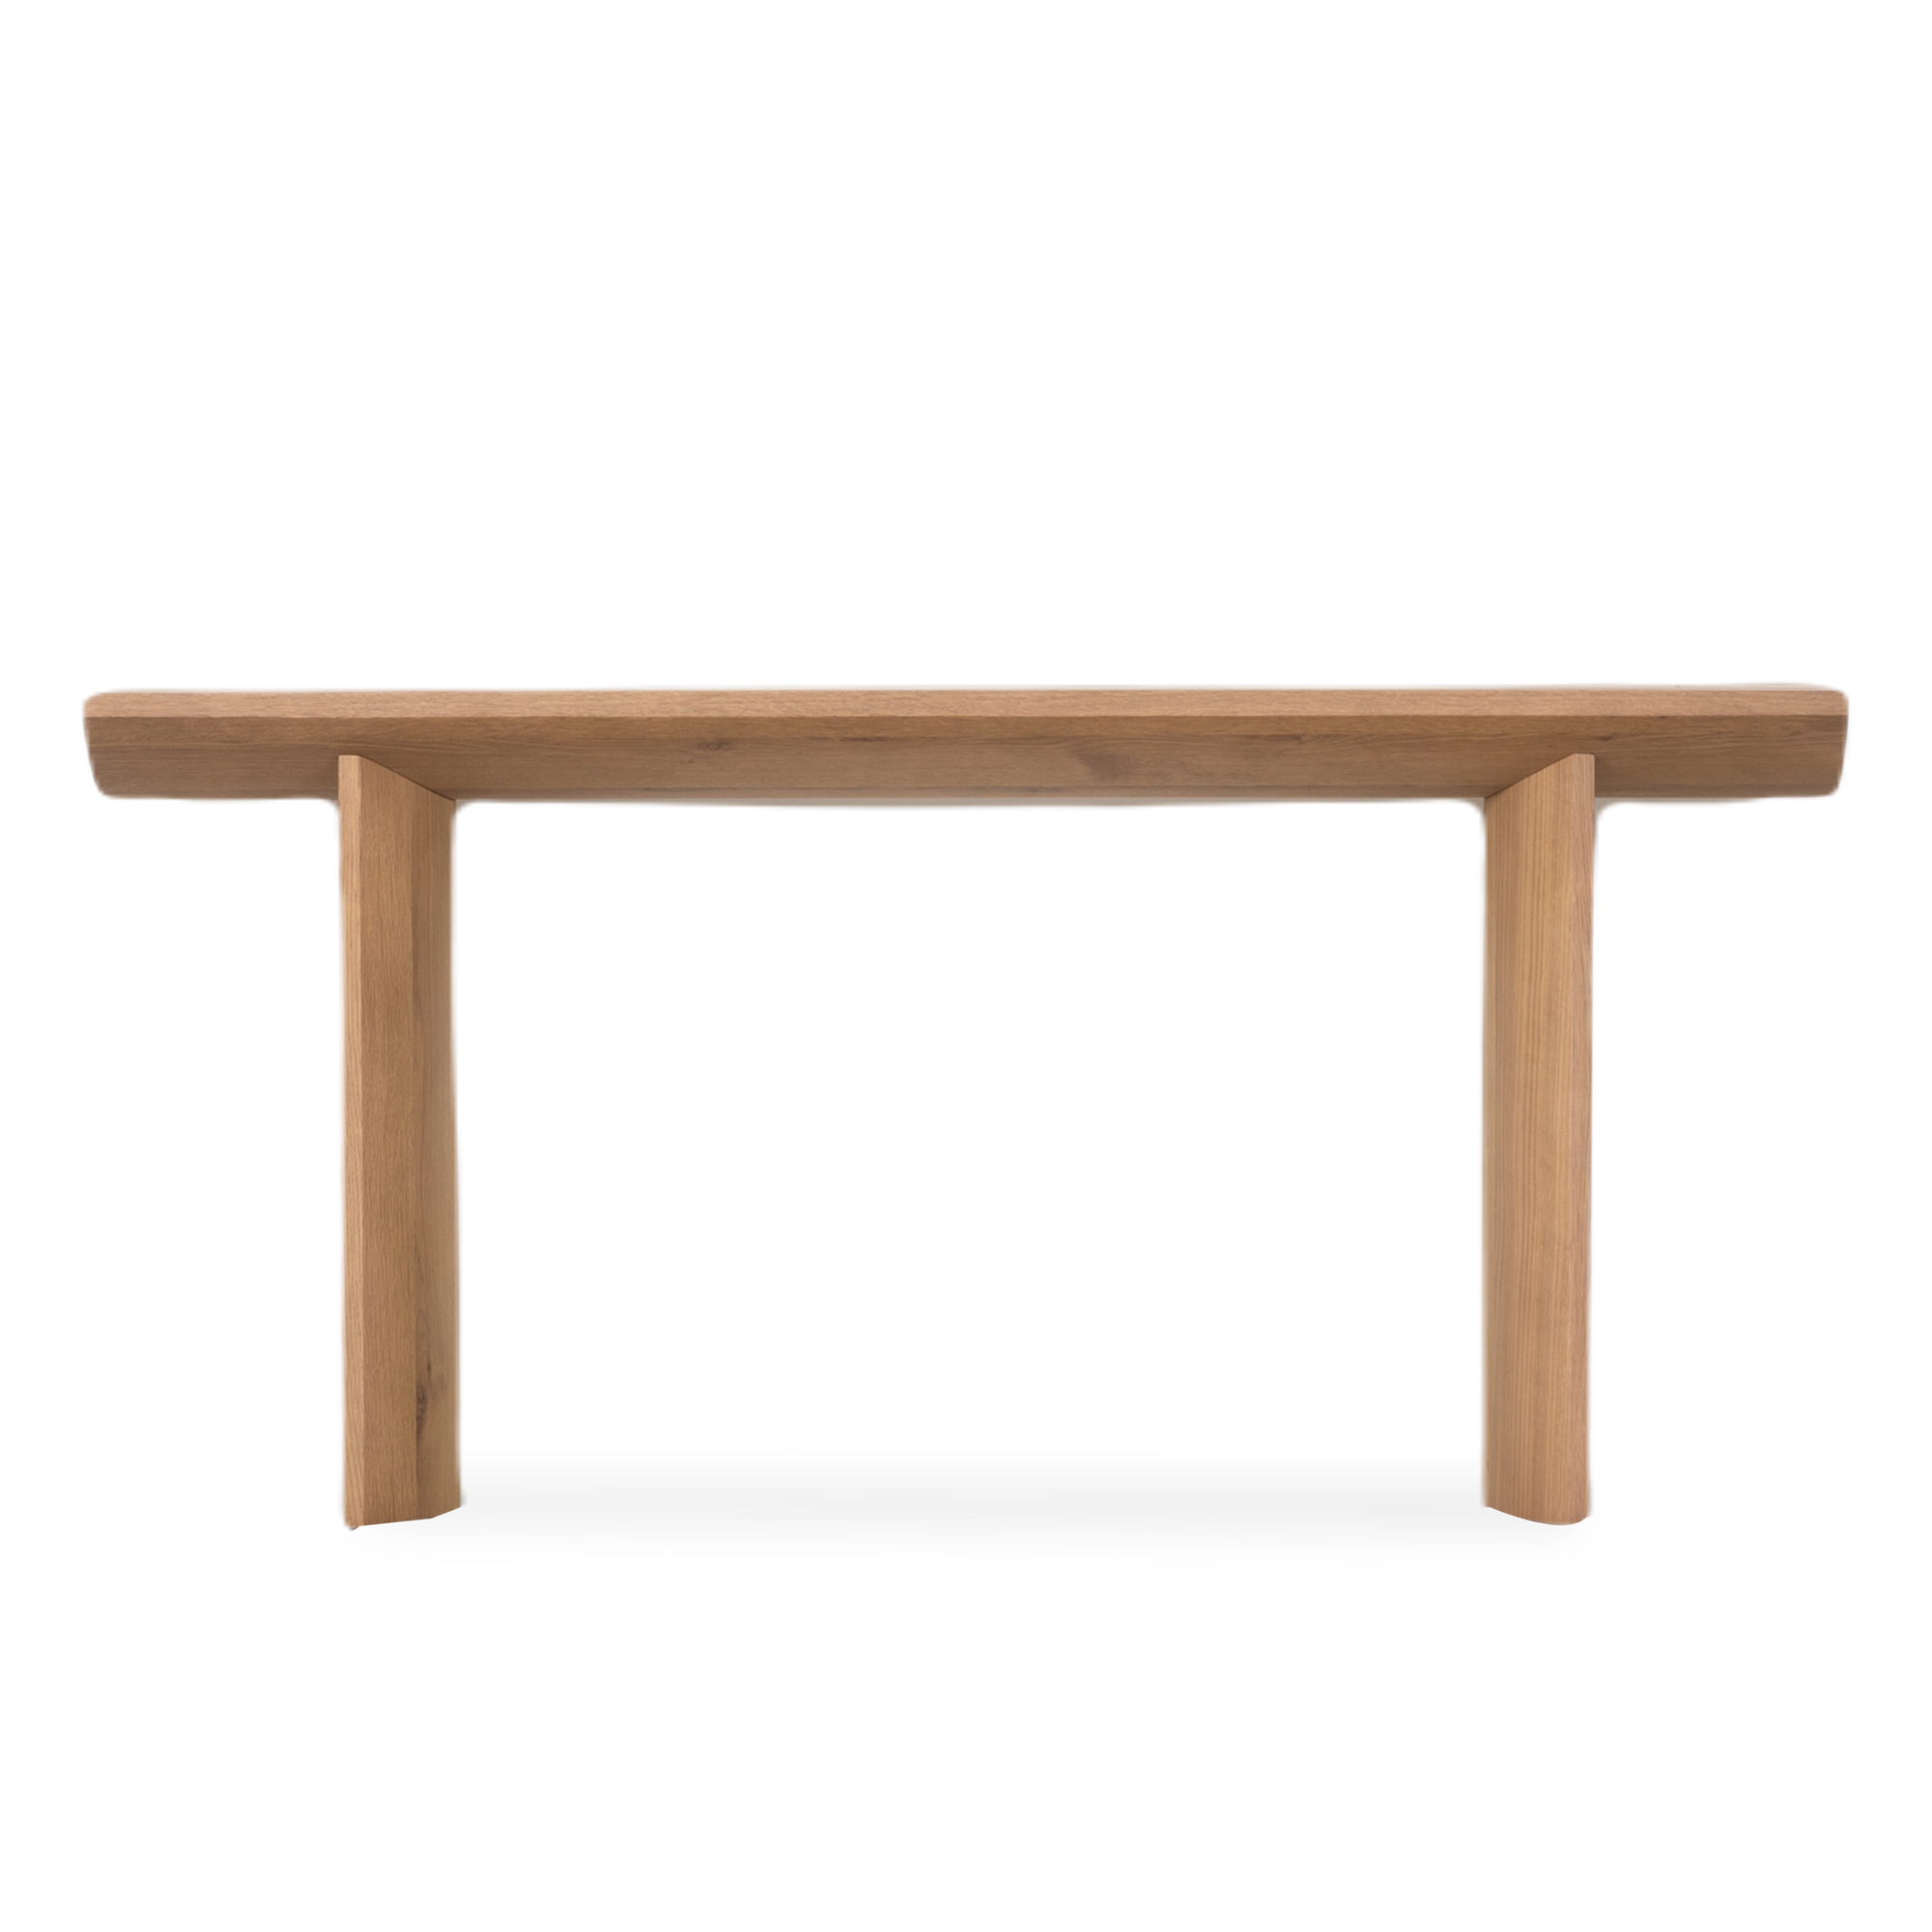 Showcasing a simple elegance, the Crescent Console Table is all about displaying the beauty of oak wood.